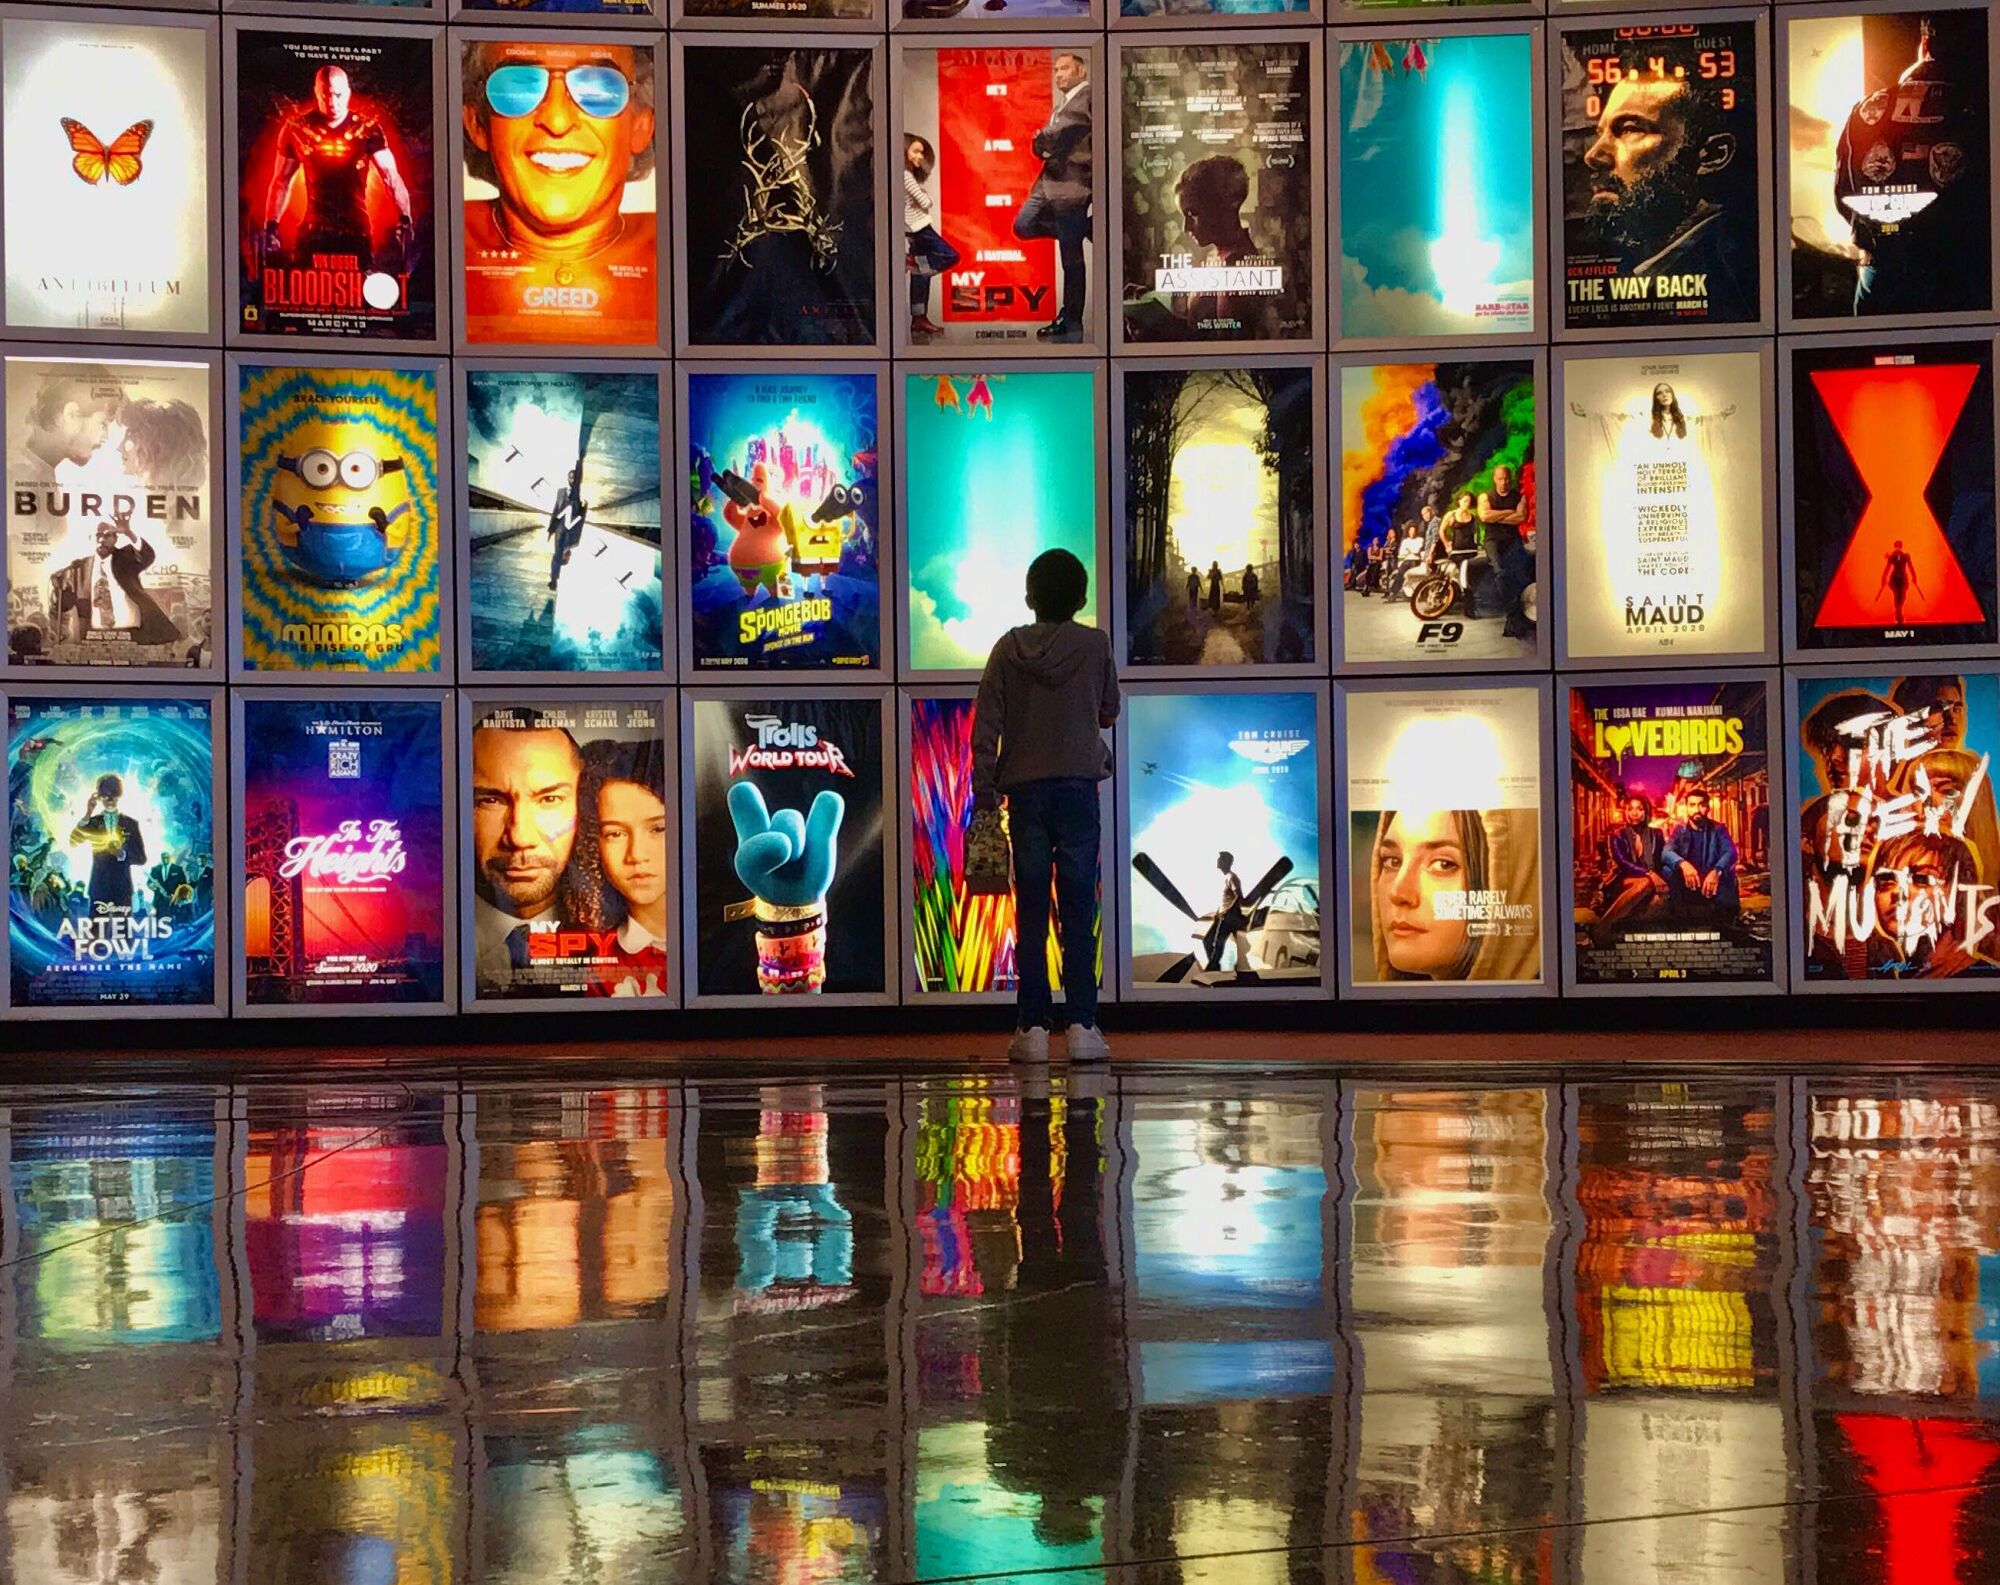 A child looks at movie posters inside the lobby of the ArcLight movie theater in Manhattan Beach.